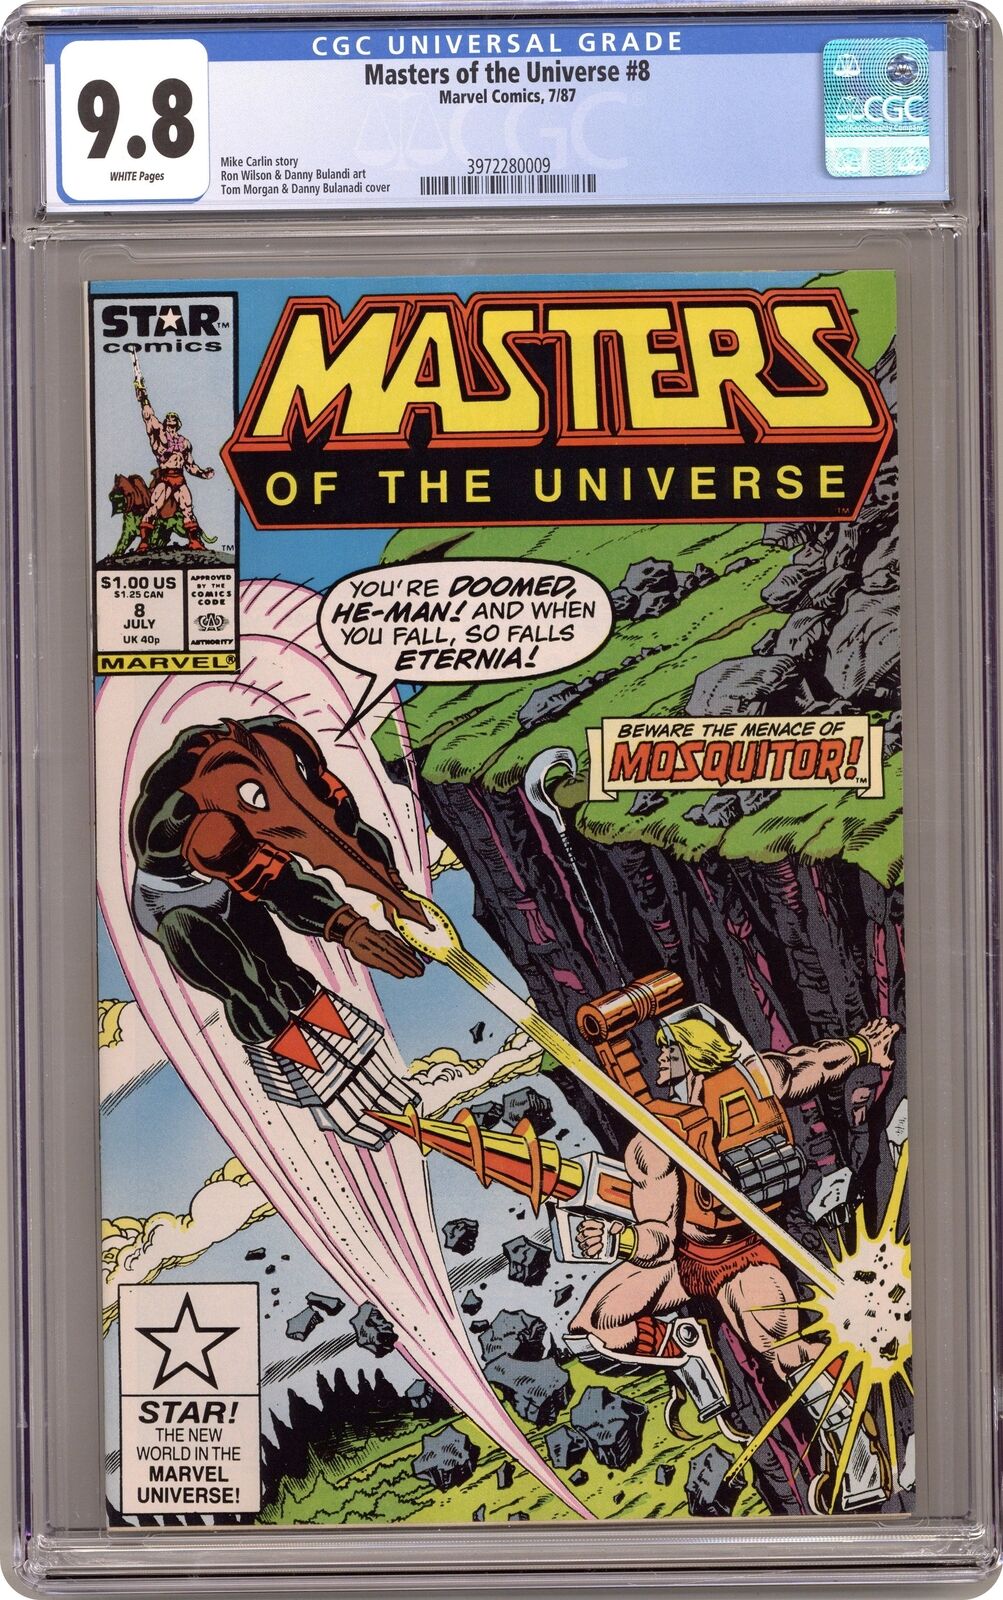 Masters of the Universe #8 CGC 9.8 1987 3972280009